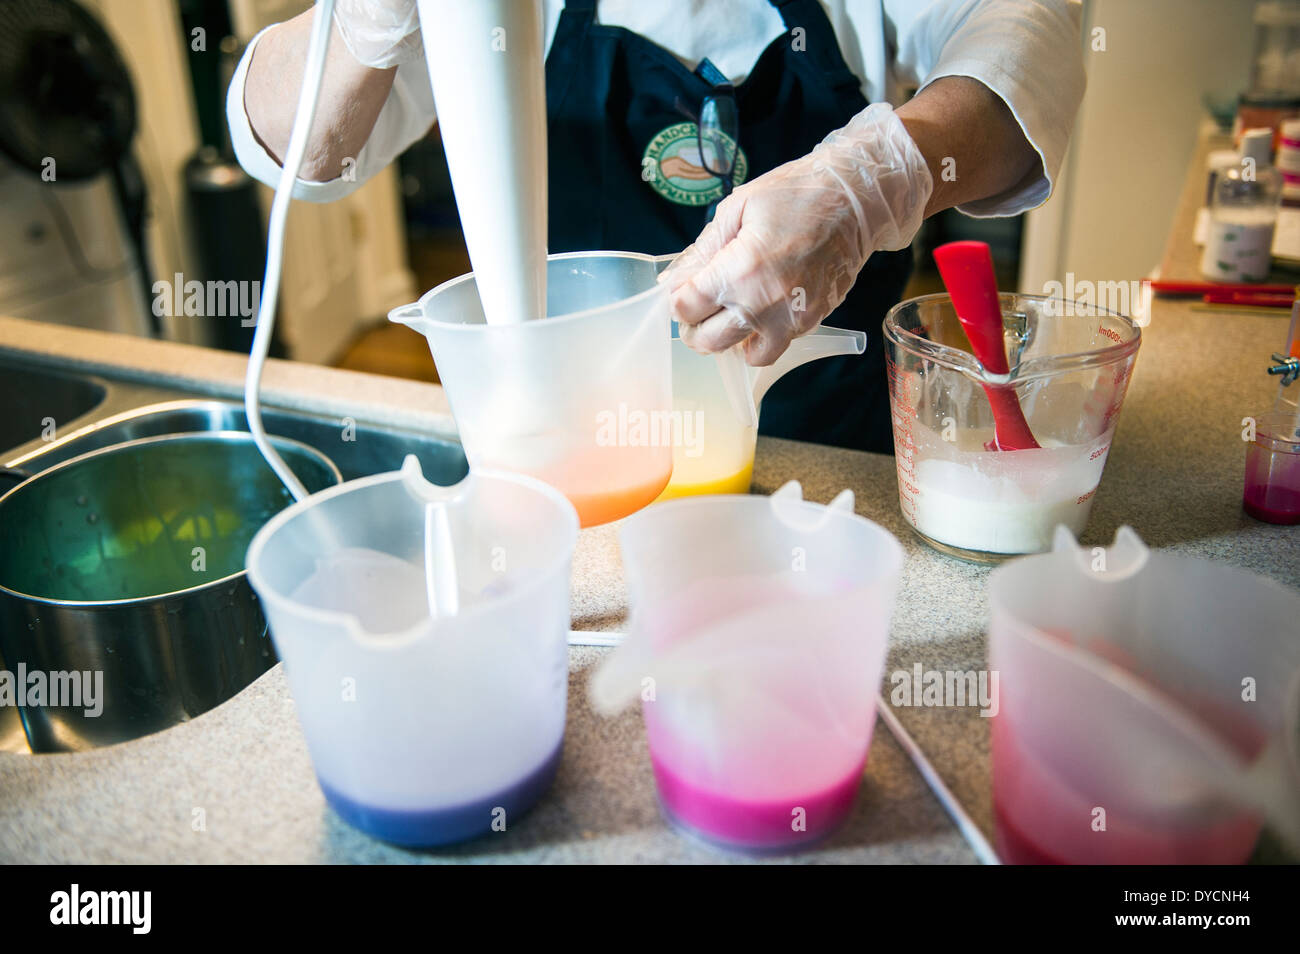 A woman mixing colors for handcrafted soap Stock Photo